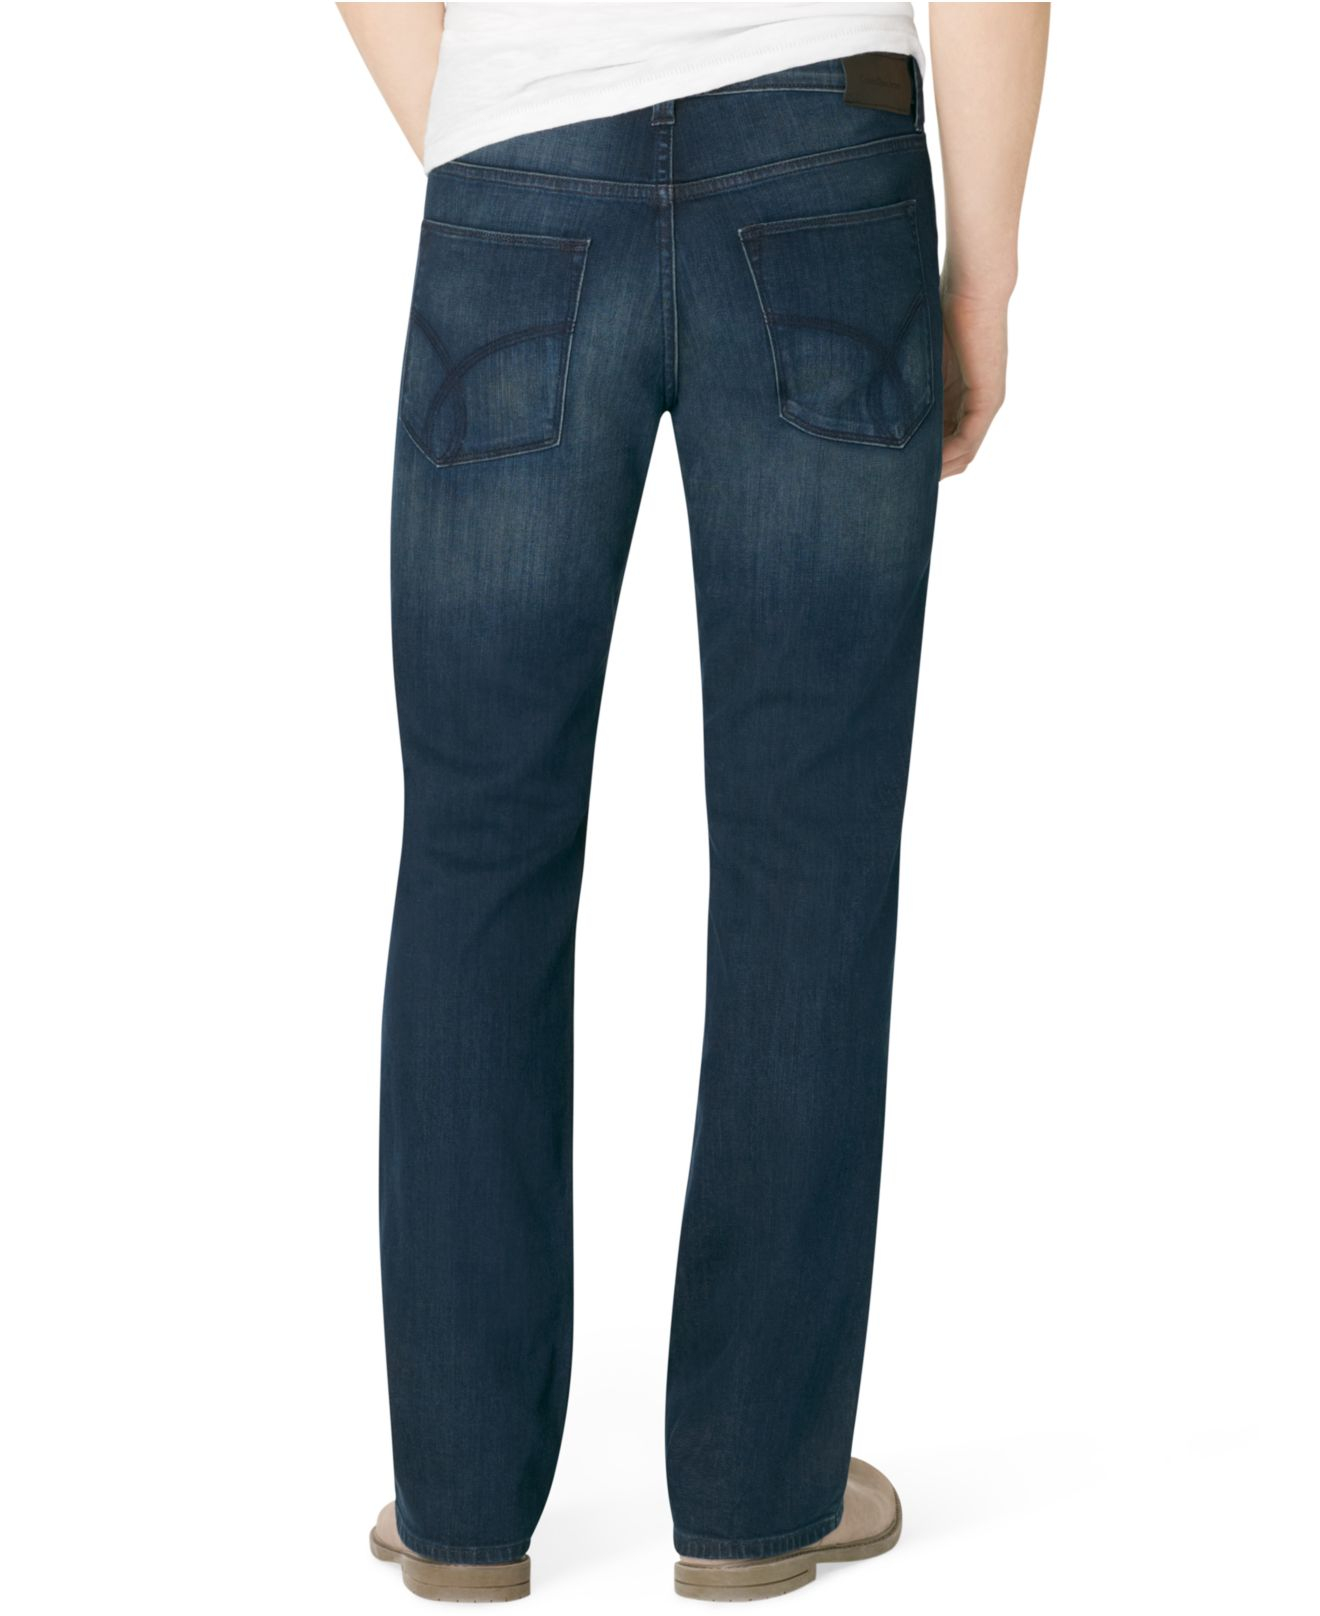 calvin klein mens bootcut jeans Cheaper Than Retail Price> Buy Clothing,  Accessories and lifestyle products for women & men -